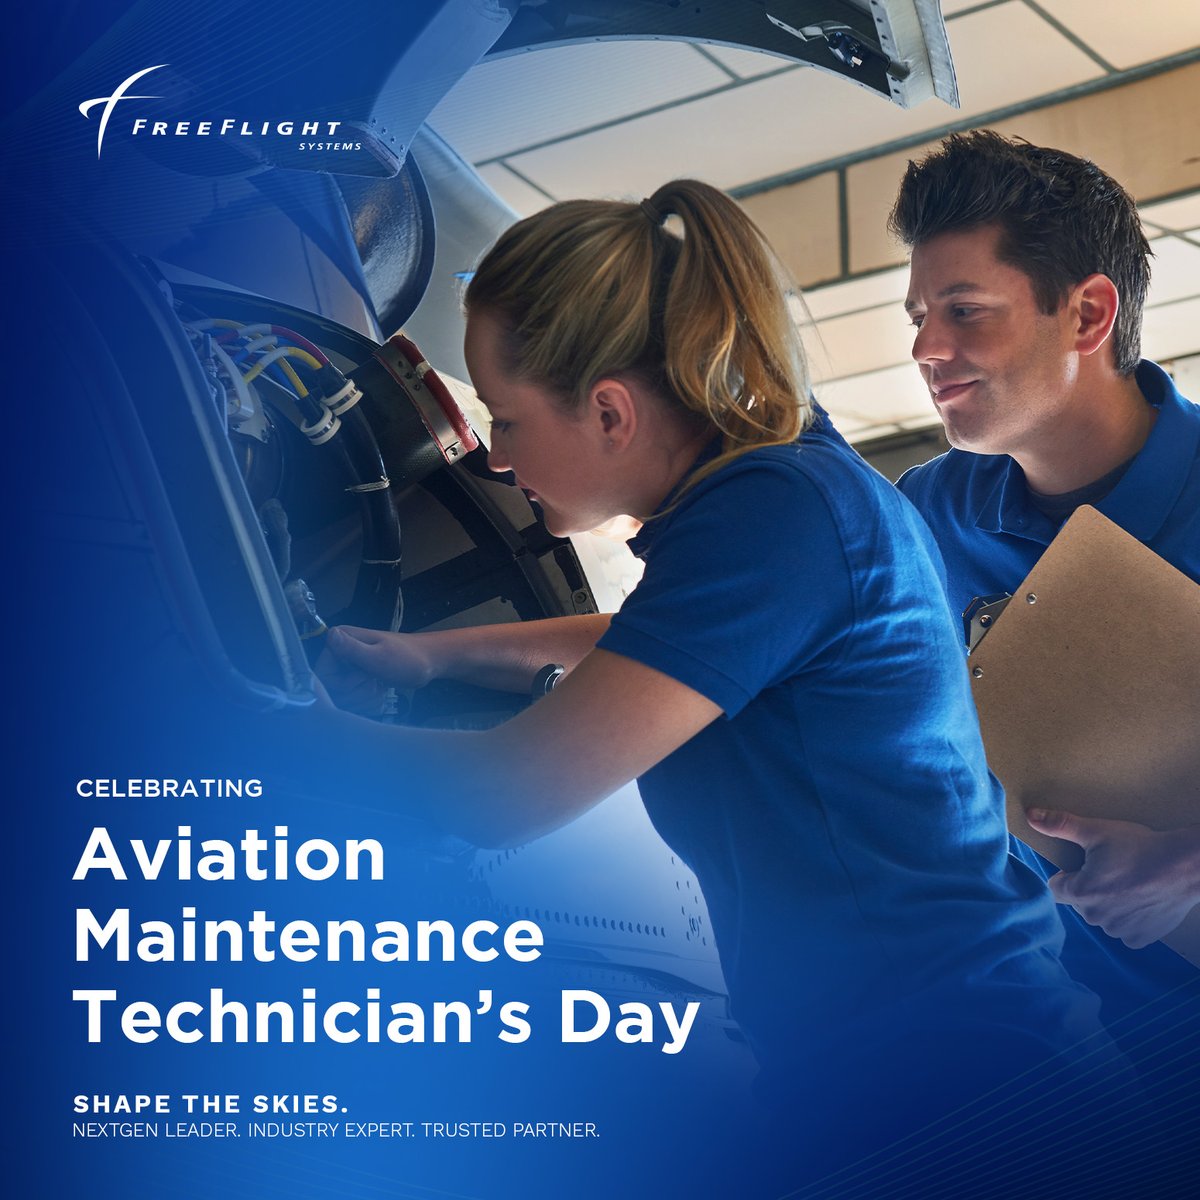 On May 24, we celebrate #AviationMaintenanceTechnician Day to recognize the hard work of all aviation maintenance professionals. ✈️ Thank you to all aviation maintenance technicians who ensure that every aircraft is in optimal condition for takeoff. 🙌🛫